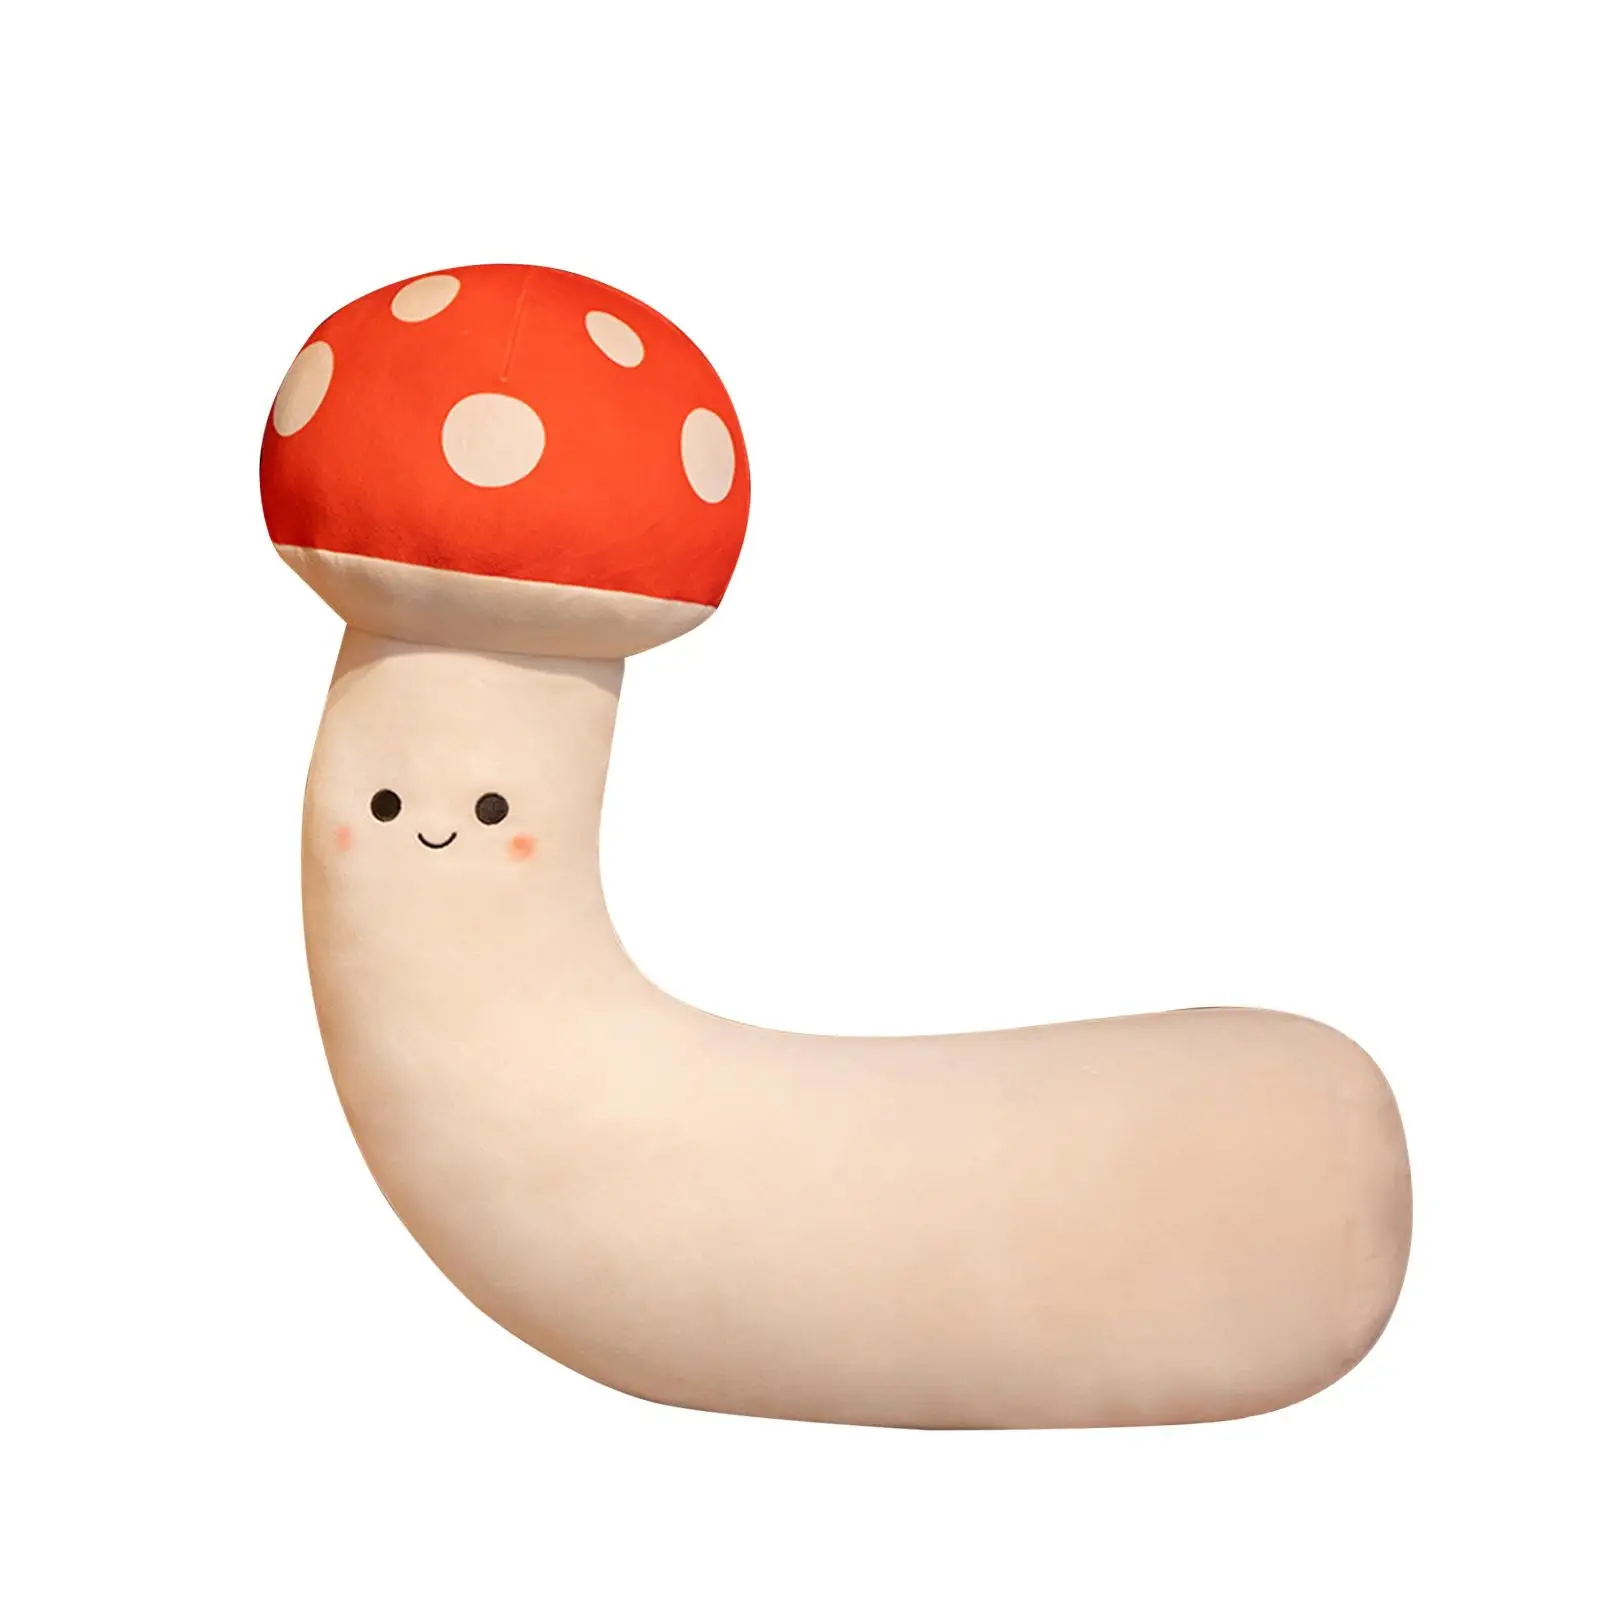 Lovely Plush Mushroom Toy Ornament Soft Sleeping Accompany Toy Stuffed Plush Toy for Living Room Home Bedroom Decoration